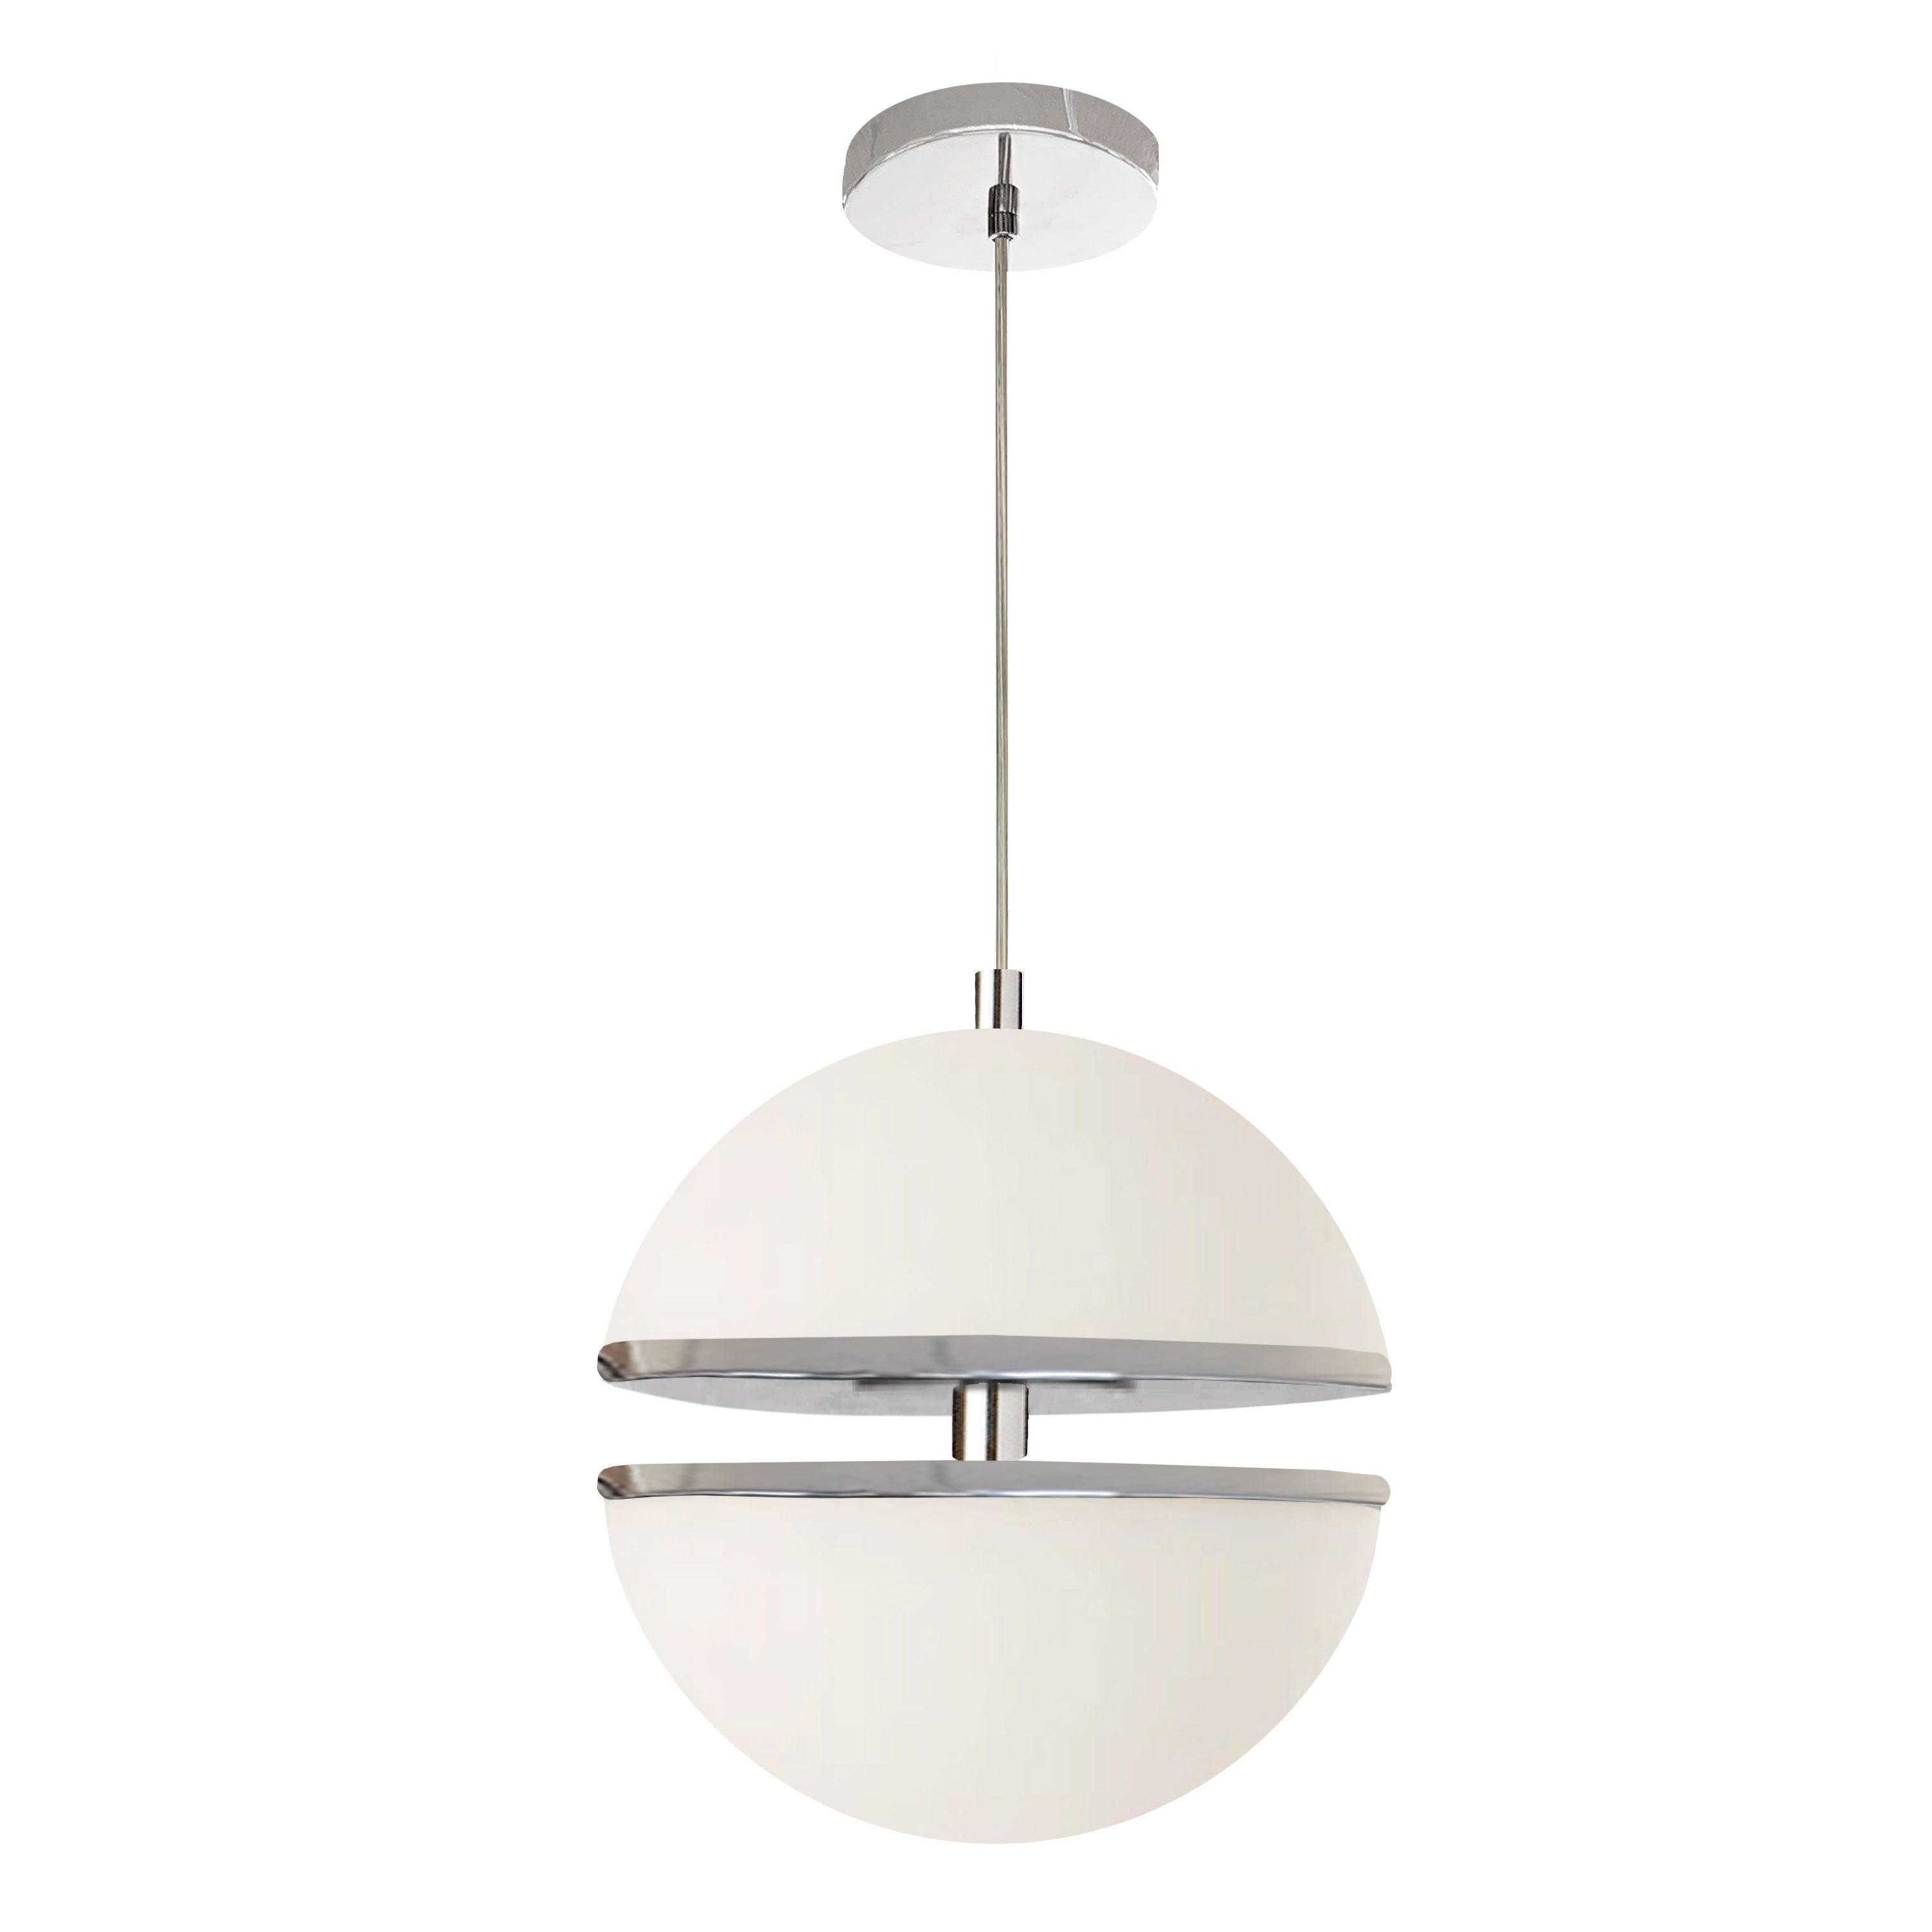 Inspired by the shapes of the cosmos, the Atomic family of lighting builds on the basic appeal of the sphere. An intriguing element of construction adds a focal point at the center of the design. A simple drop leads to a metal frame and a white glass globe with a separated upper and lower half. Lights shine from both halves. In one option, the frame in a contrasting color is visible at the mid-gap. In another option, a fabric shade in complementary or contrasting color rings the middle for a subtler glow of lighting. The stylish modern Atomic family of lighting will blend into your fashionable living or dining room, or main hallway.